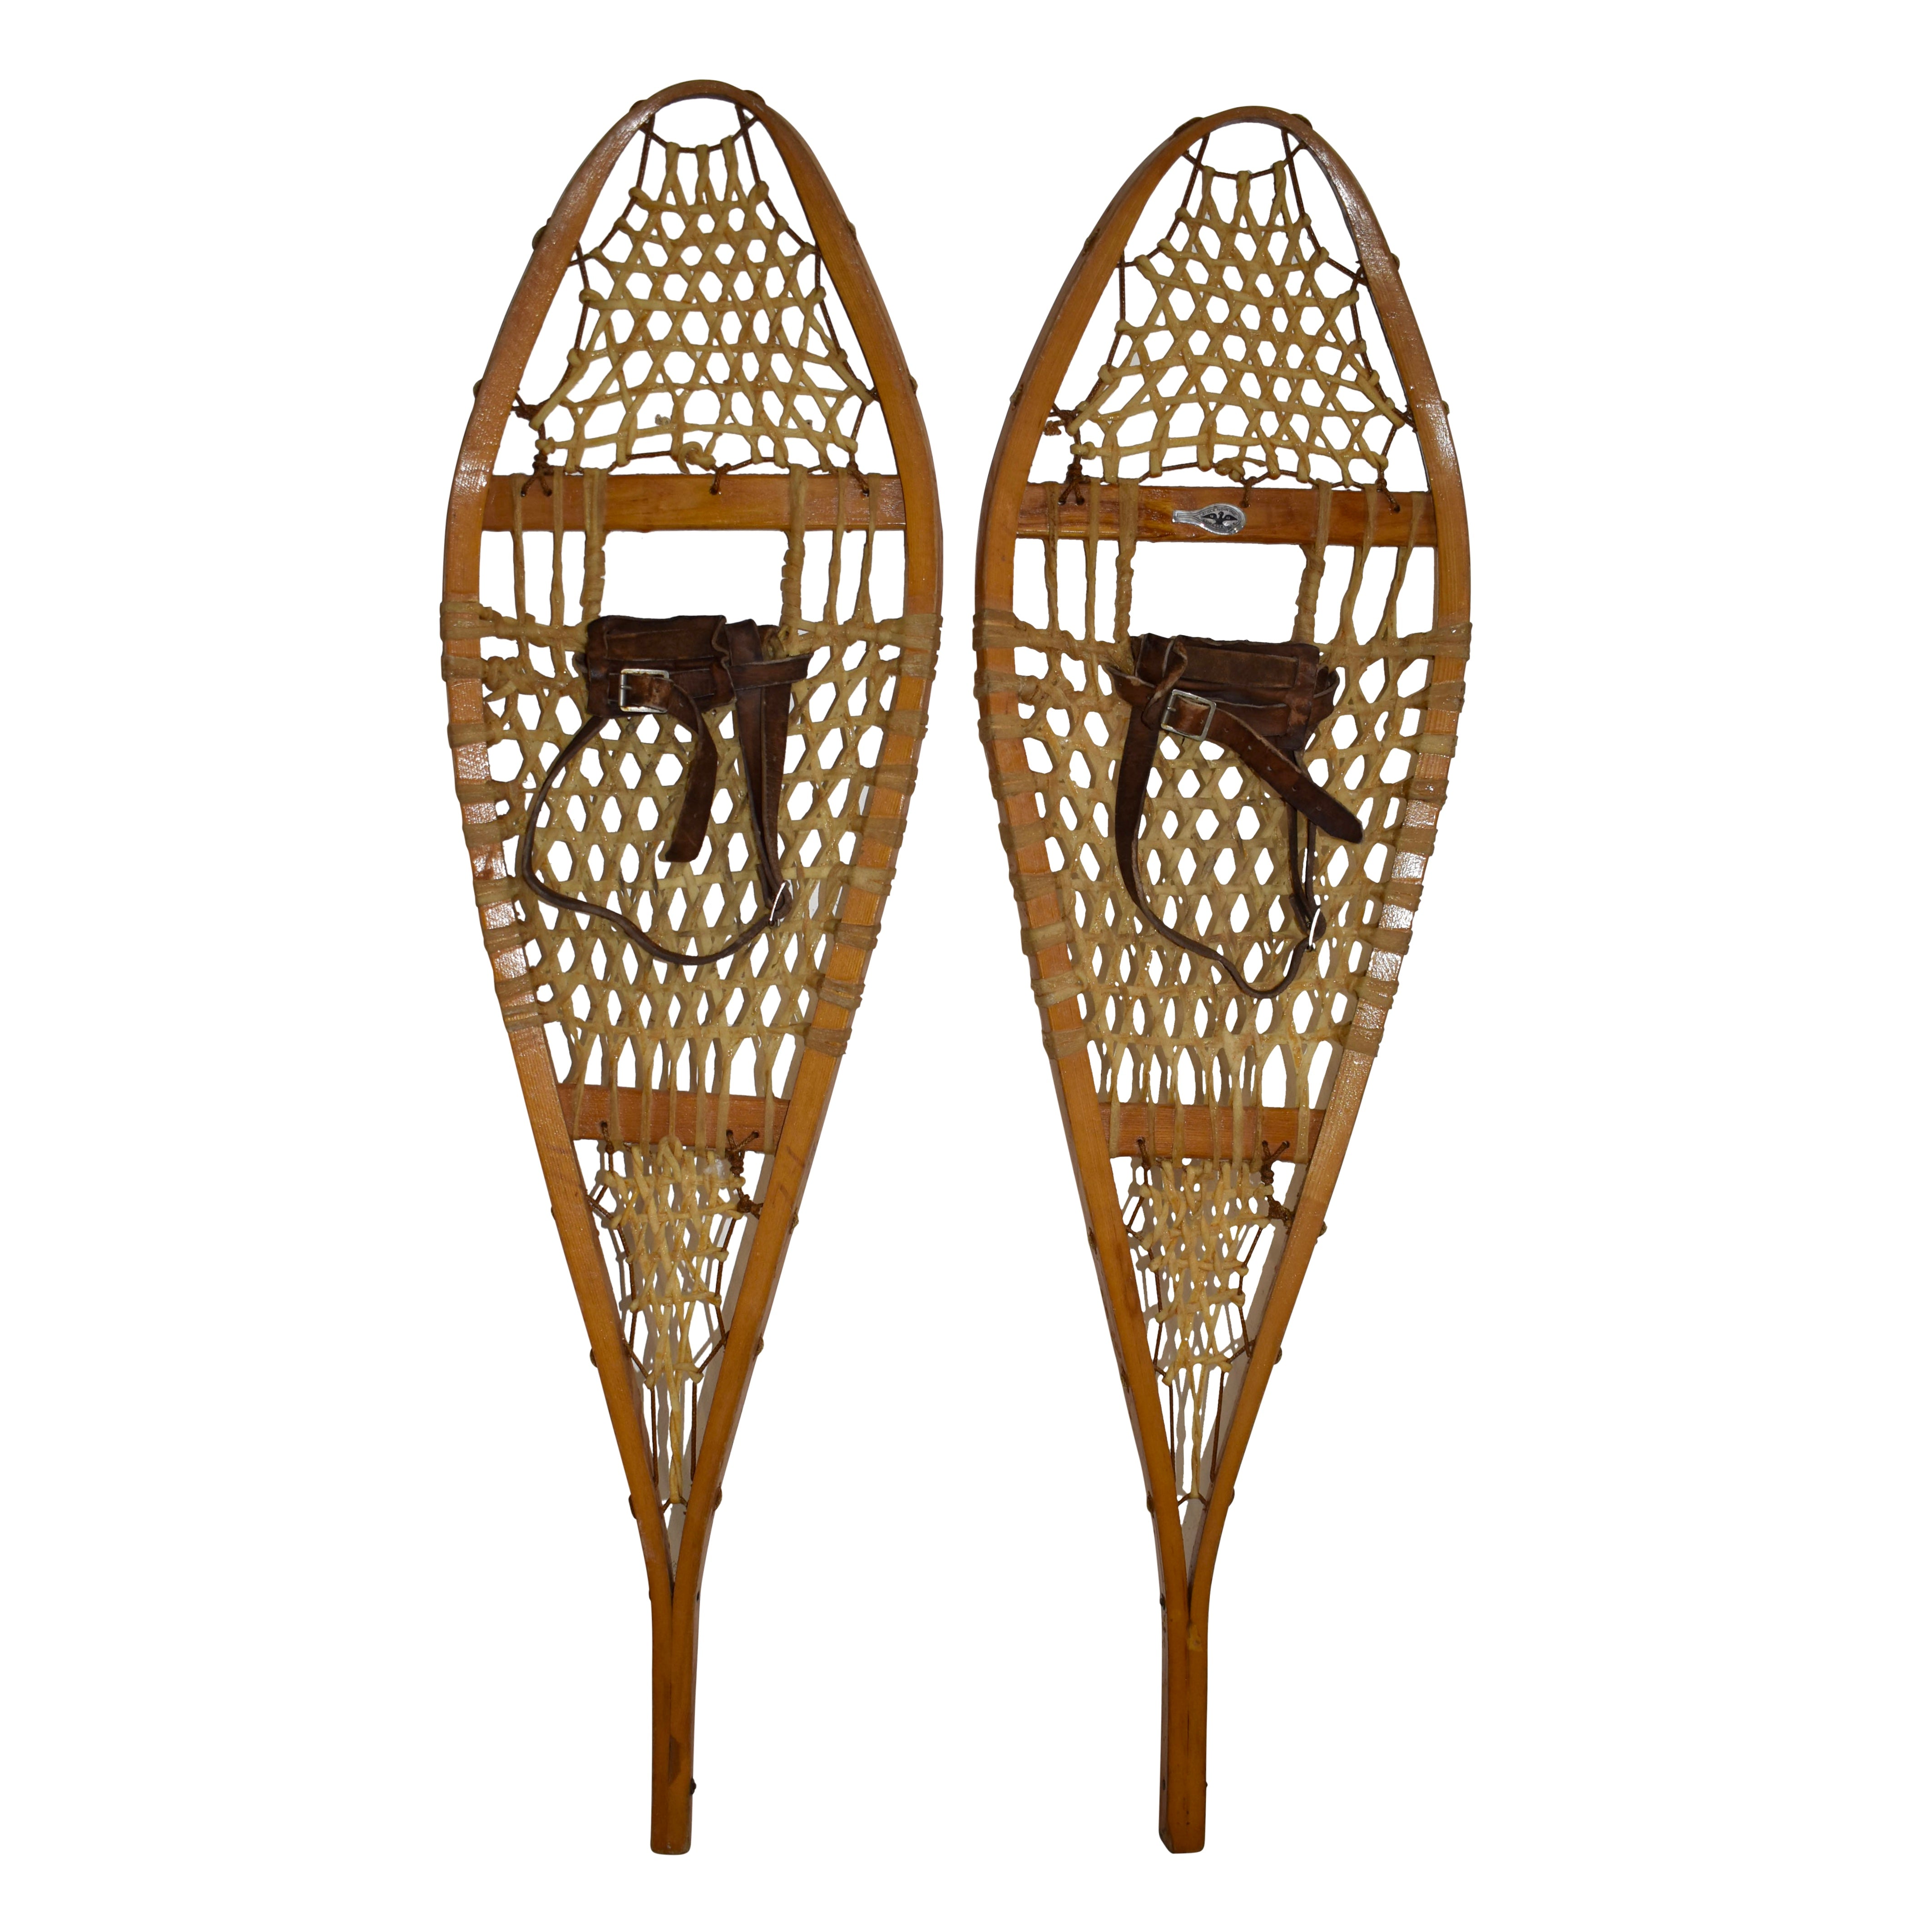 Canadian Huron Snowshoes by Black Eagle